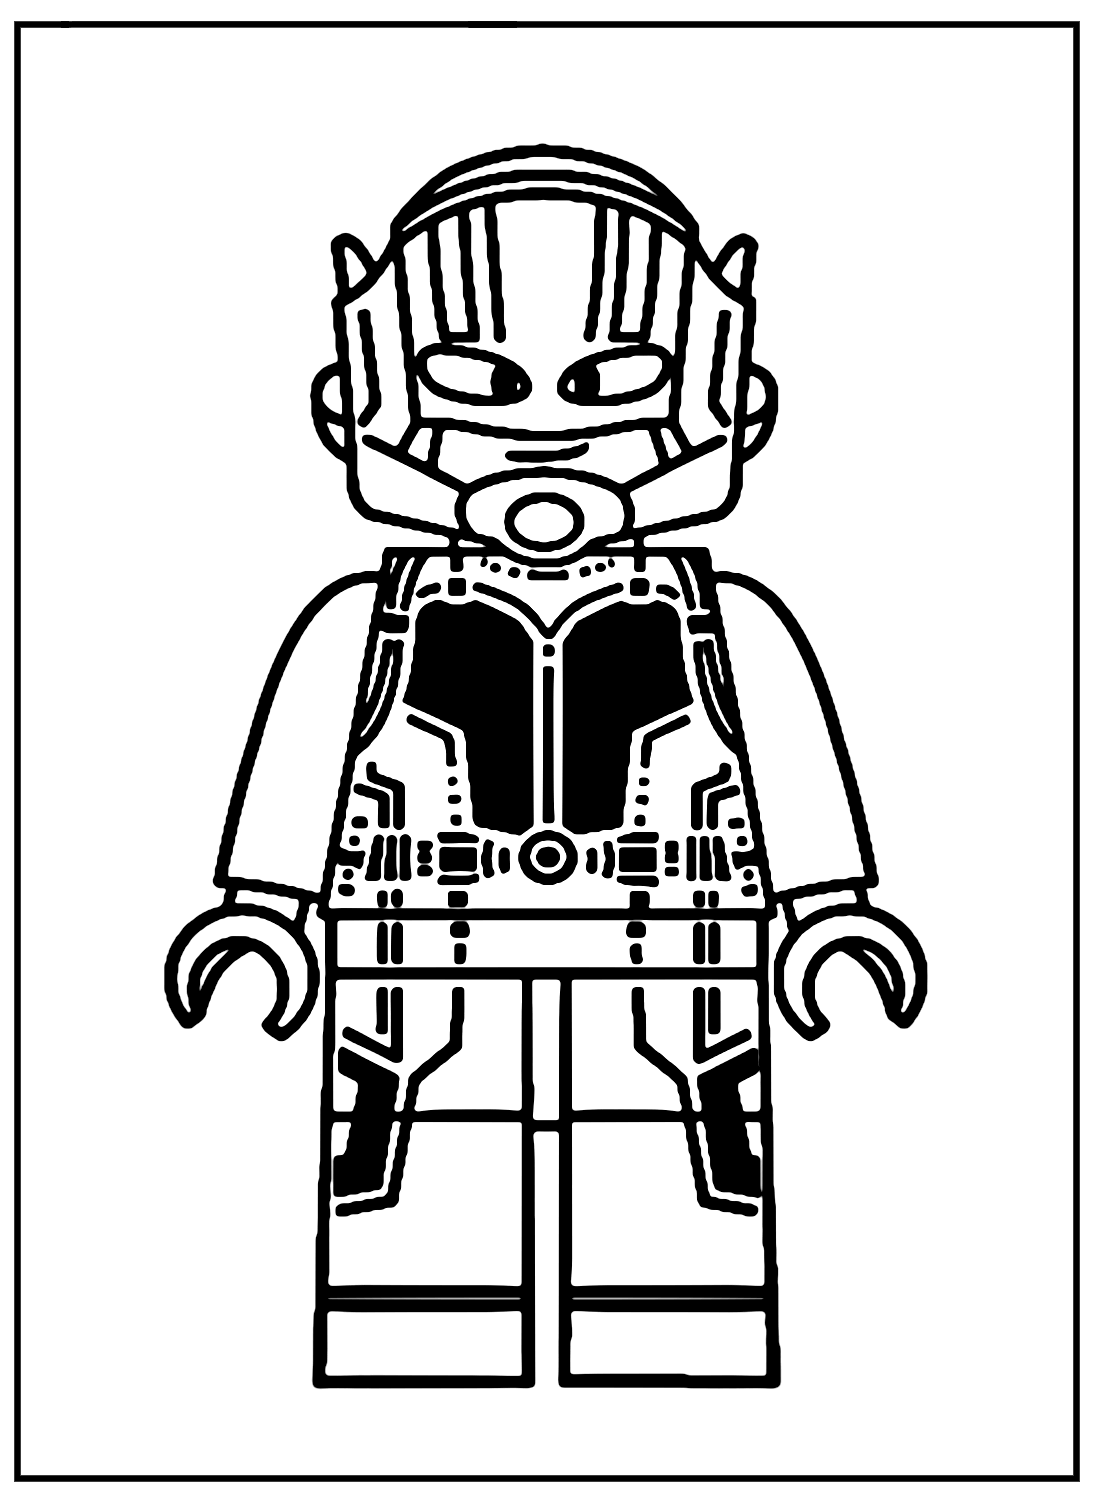 Lego Ant Man Coloring Pages